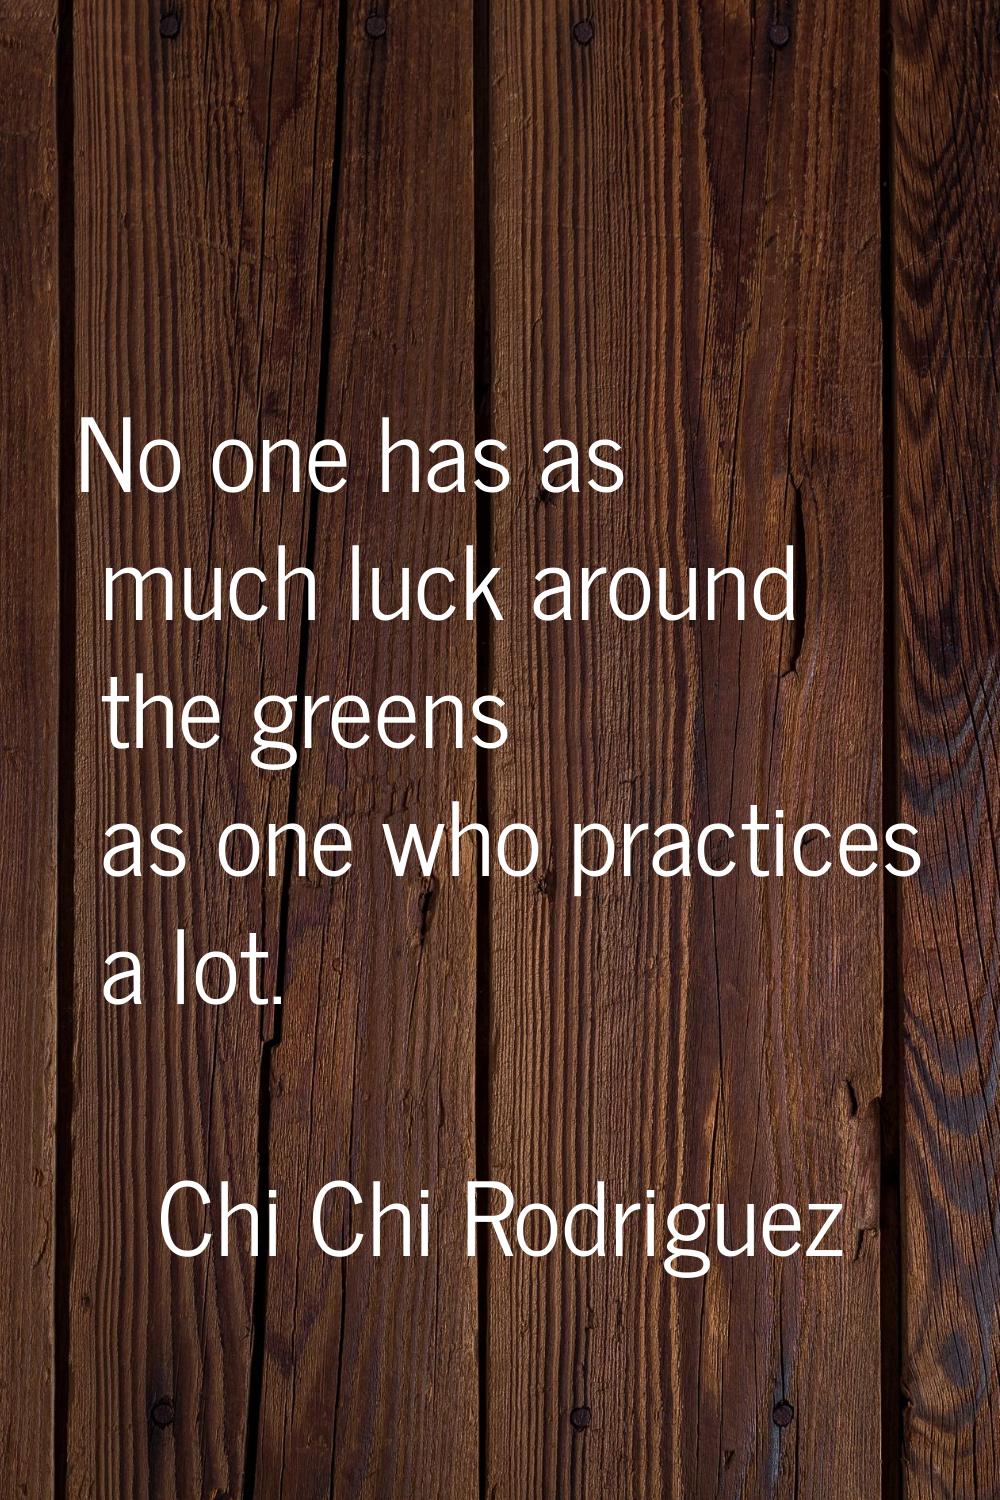 No one has as much luck around the greens as one who practices a lot.